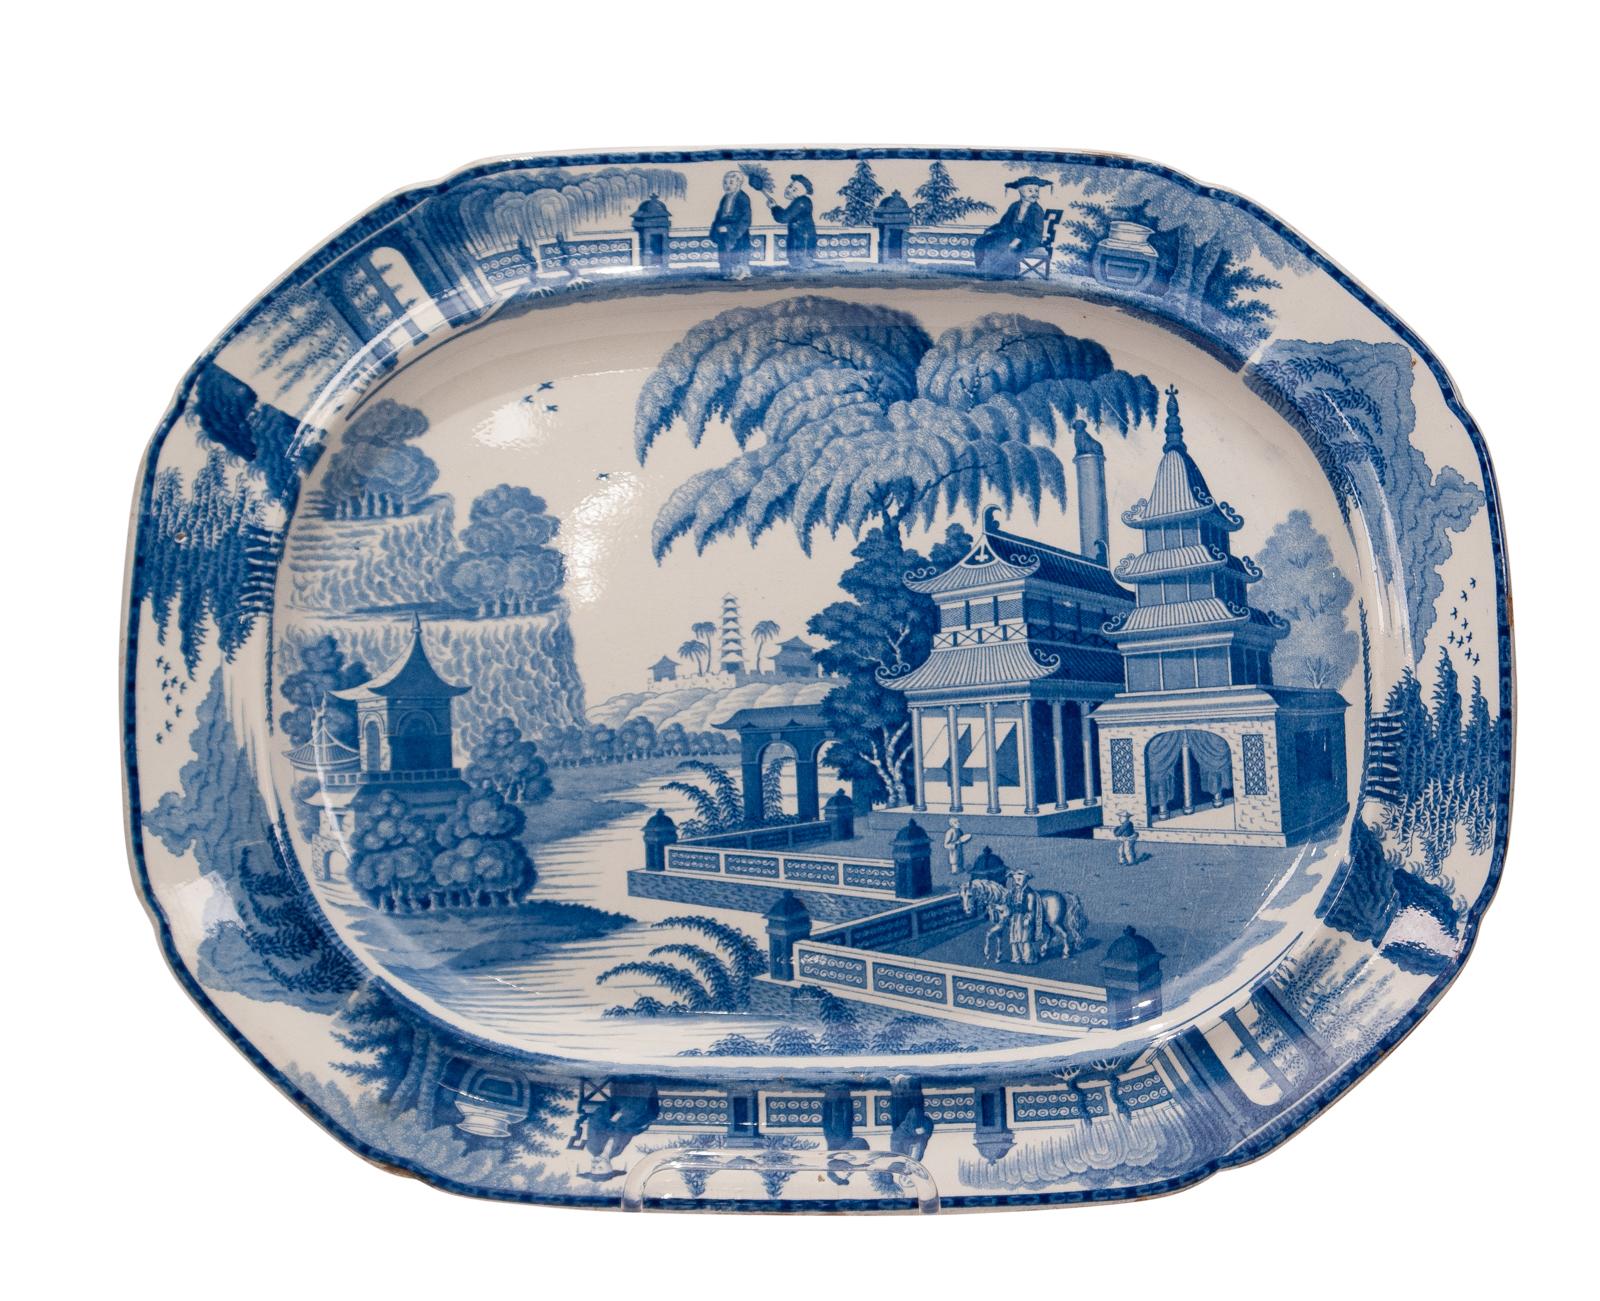 An early 19th century English large blue and white platter in the Chinese style, circa 1820.